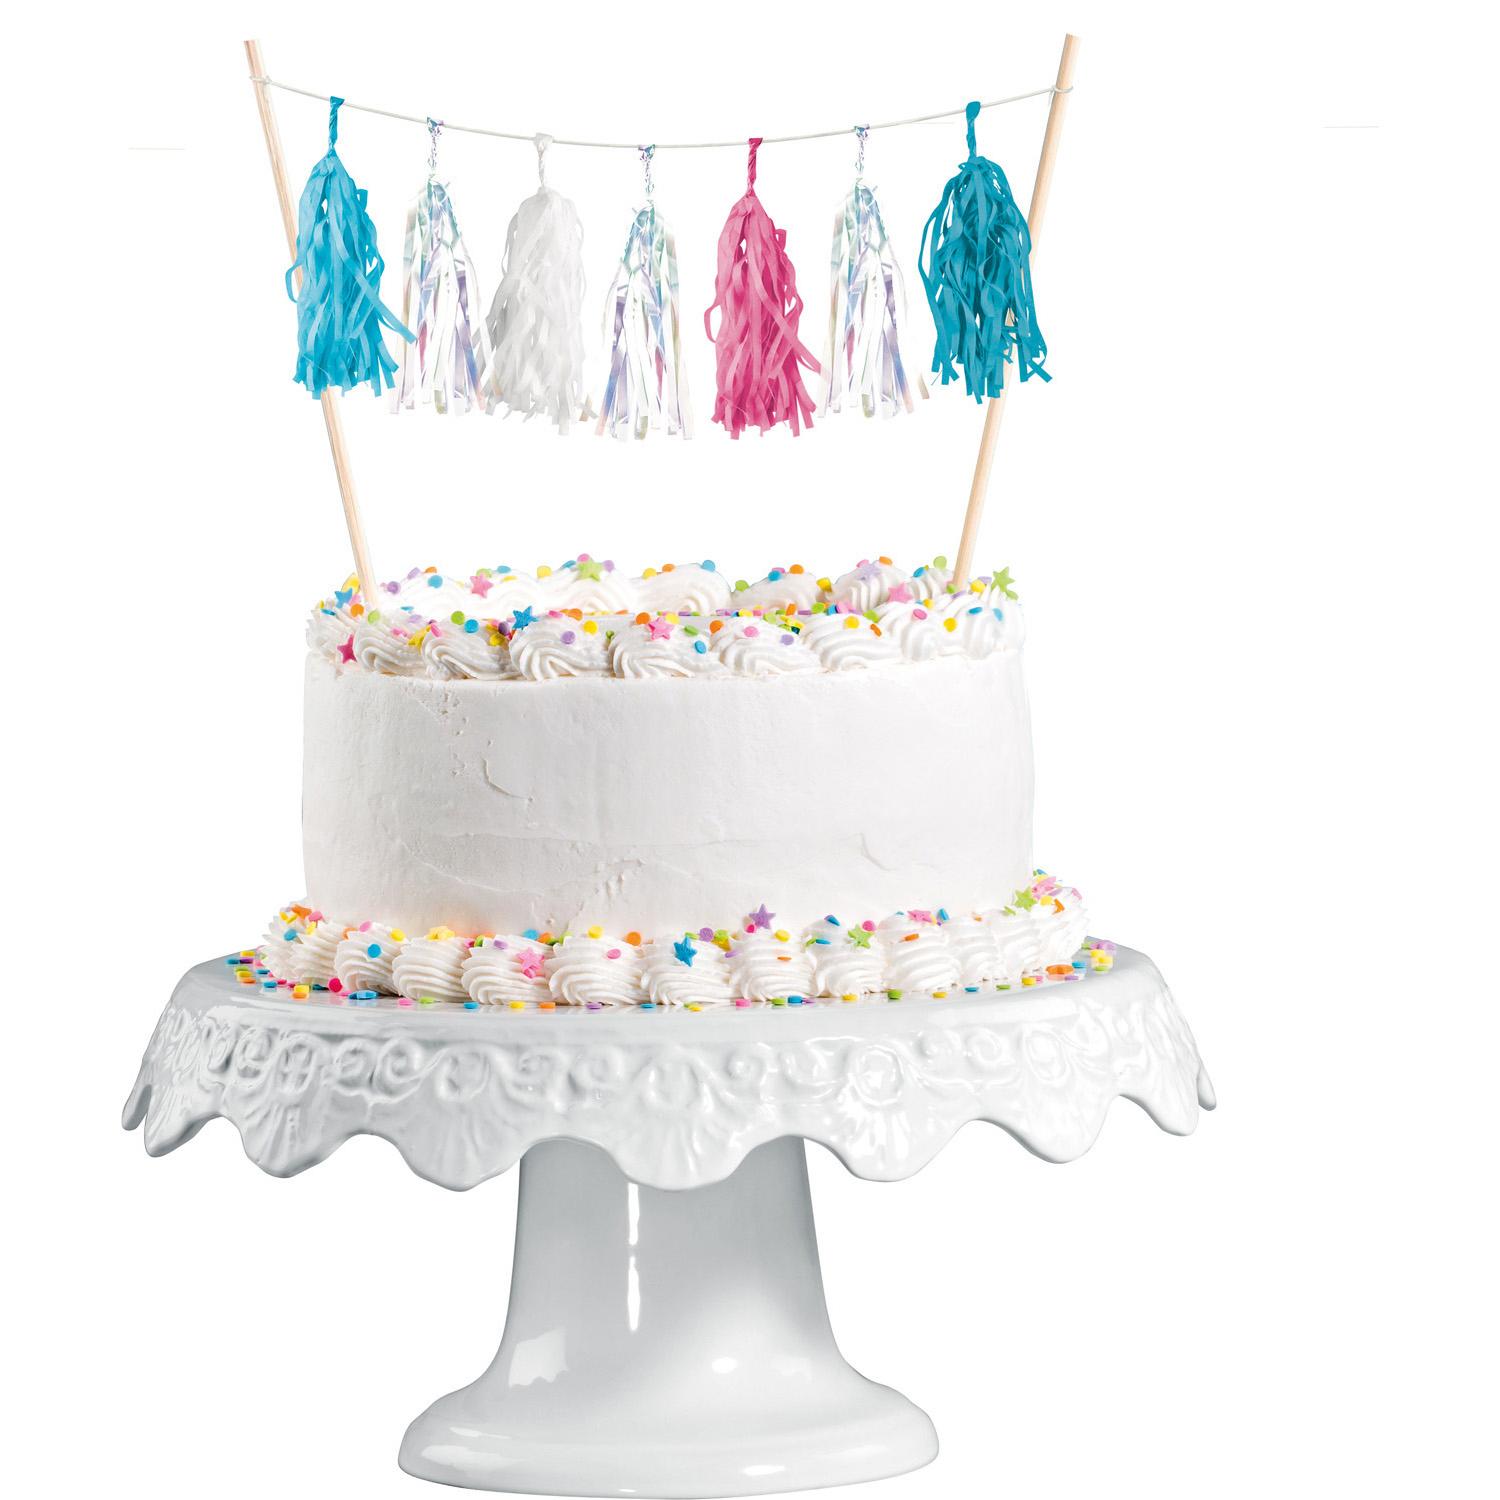 Be A Mermaid Cake Bunting Party Accessories - Party Centre